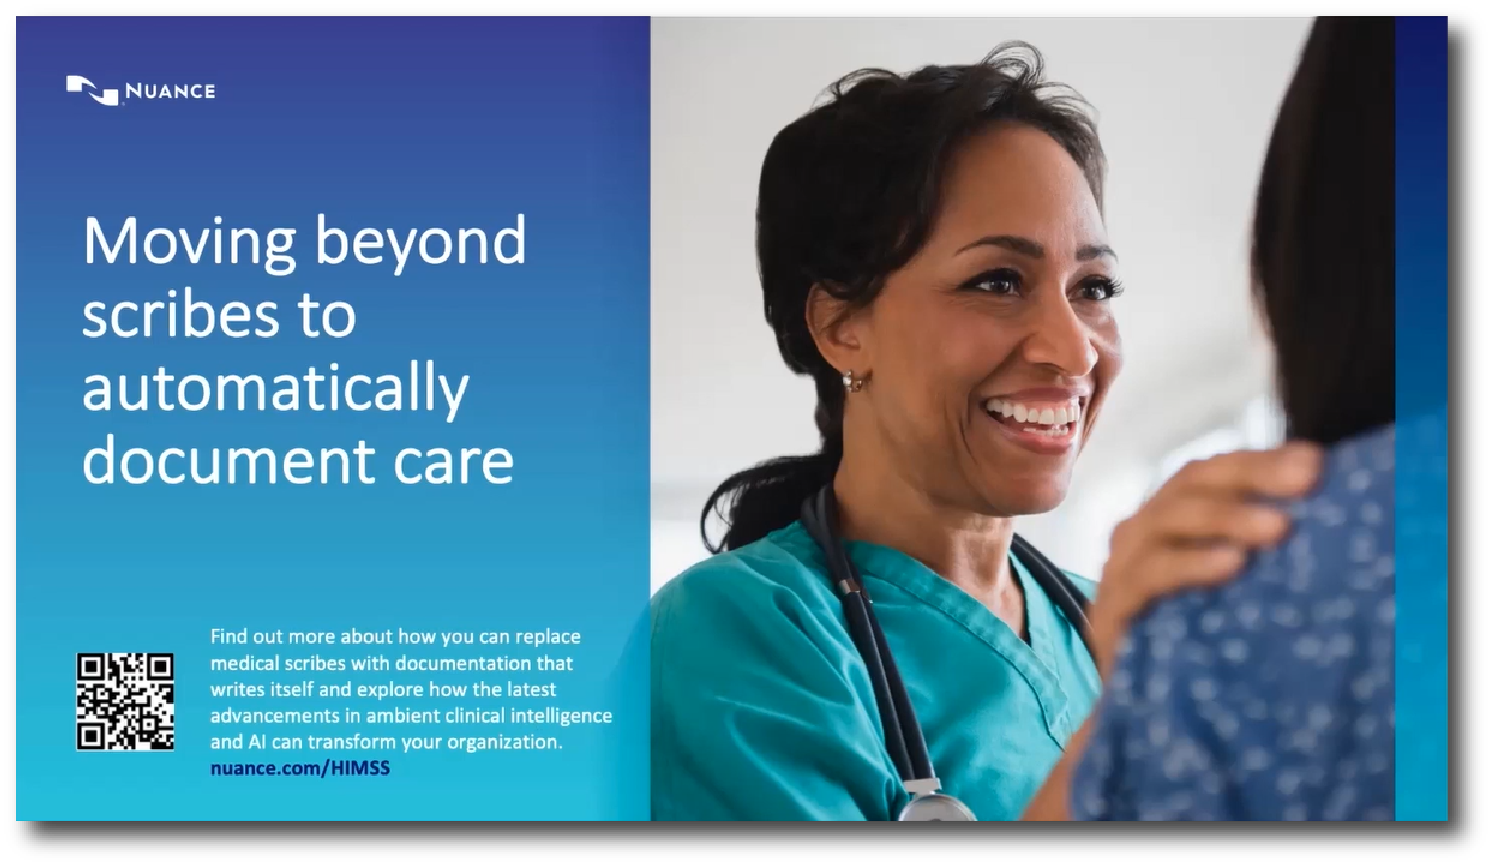 IMG-WP-Microsoft-2022-Moving beyond scribes to document care@2x.png